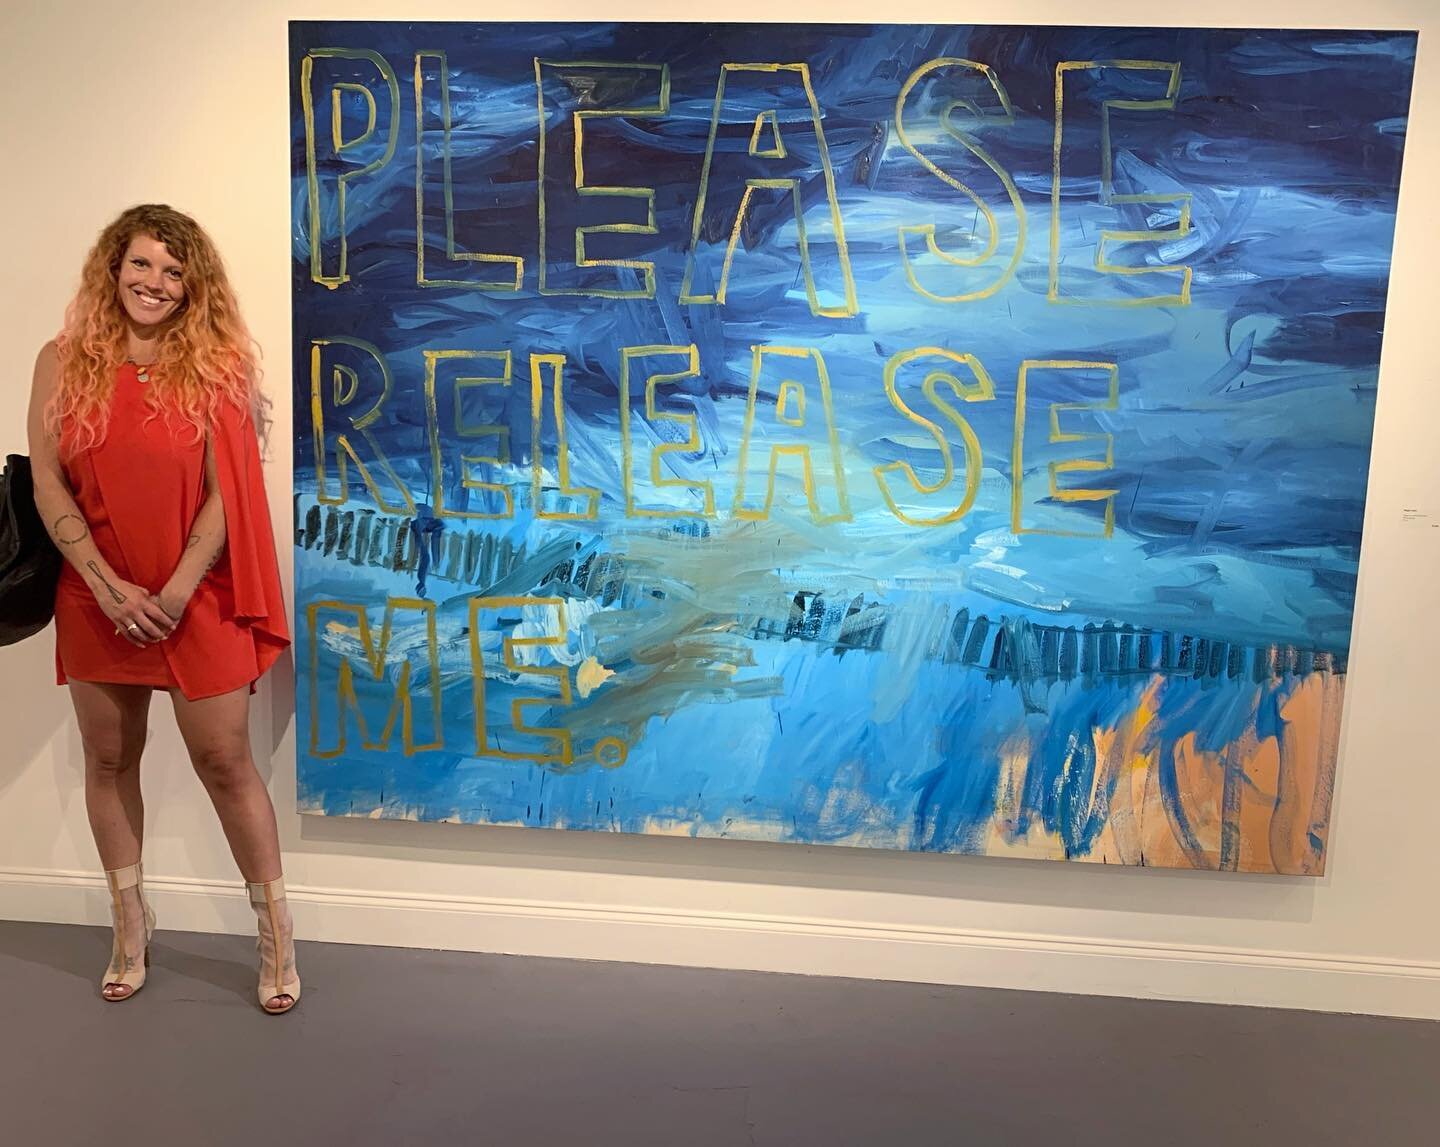 Congratulations to everyone participating in &ldquo;Summer in the city&rdquo; a group show at @sulfurstudios that opened last night.. my 6&rsquo; x 8&rsquo; painting &ldquo;A Prayer in a Swimming Pool&rdquo; is on display (and for sale) thru August 2